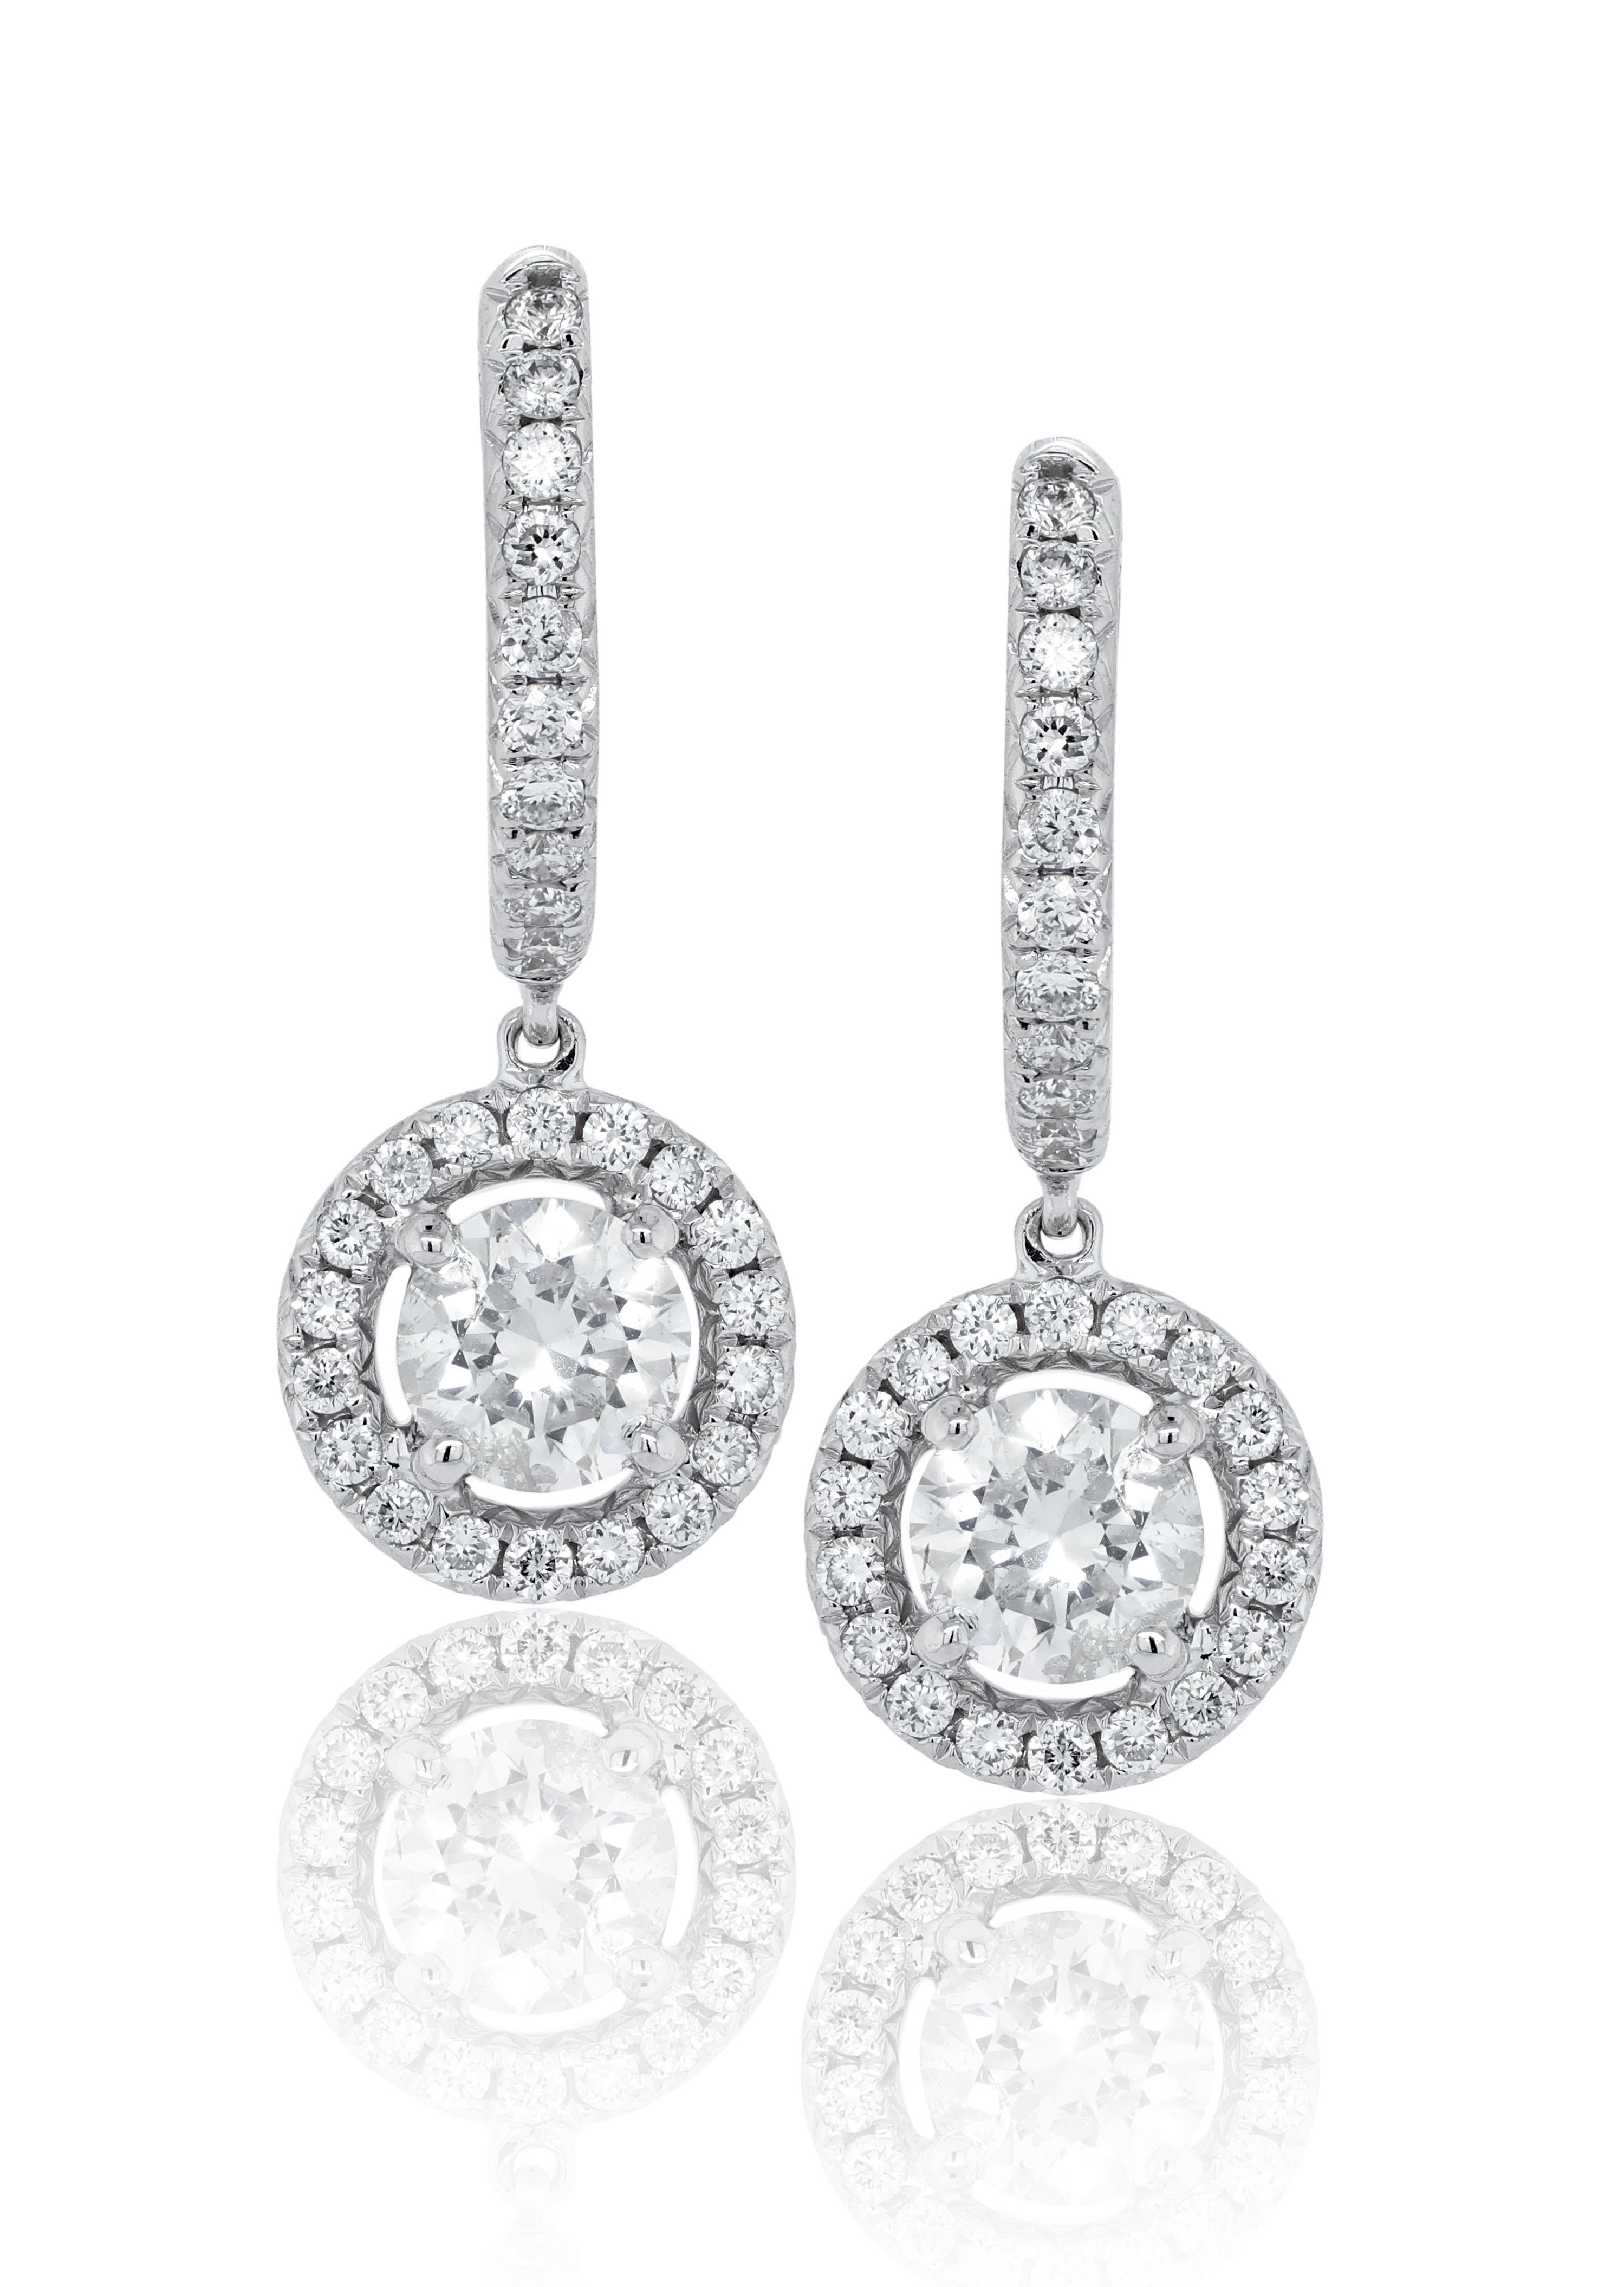 Modern Diana M. 14kt white gold hanging earrings featuring 1.20 cts tw of round diamond For Sale